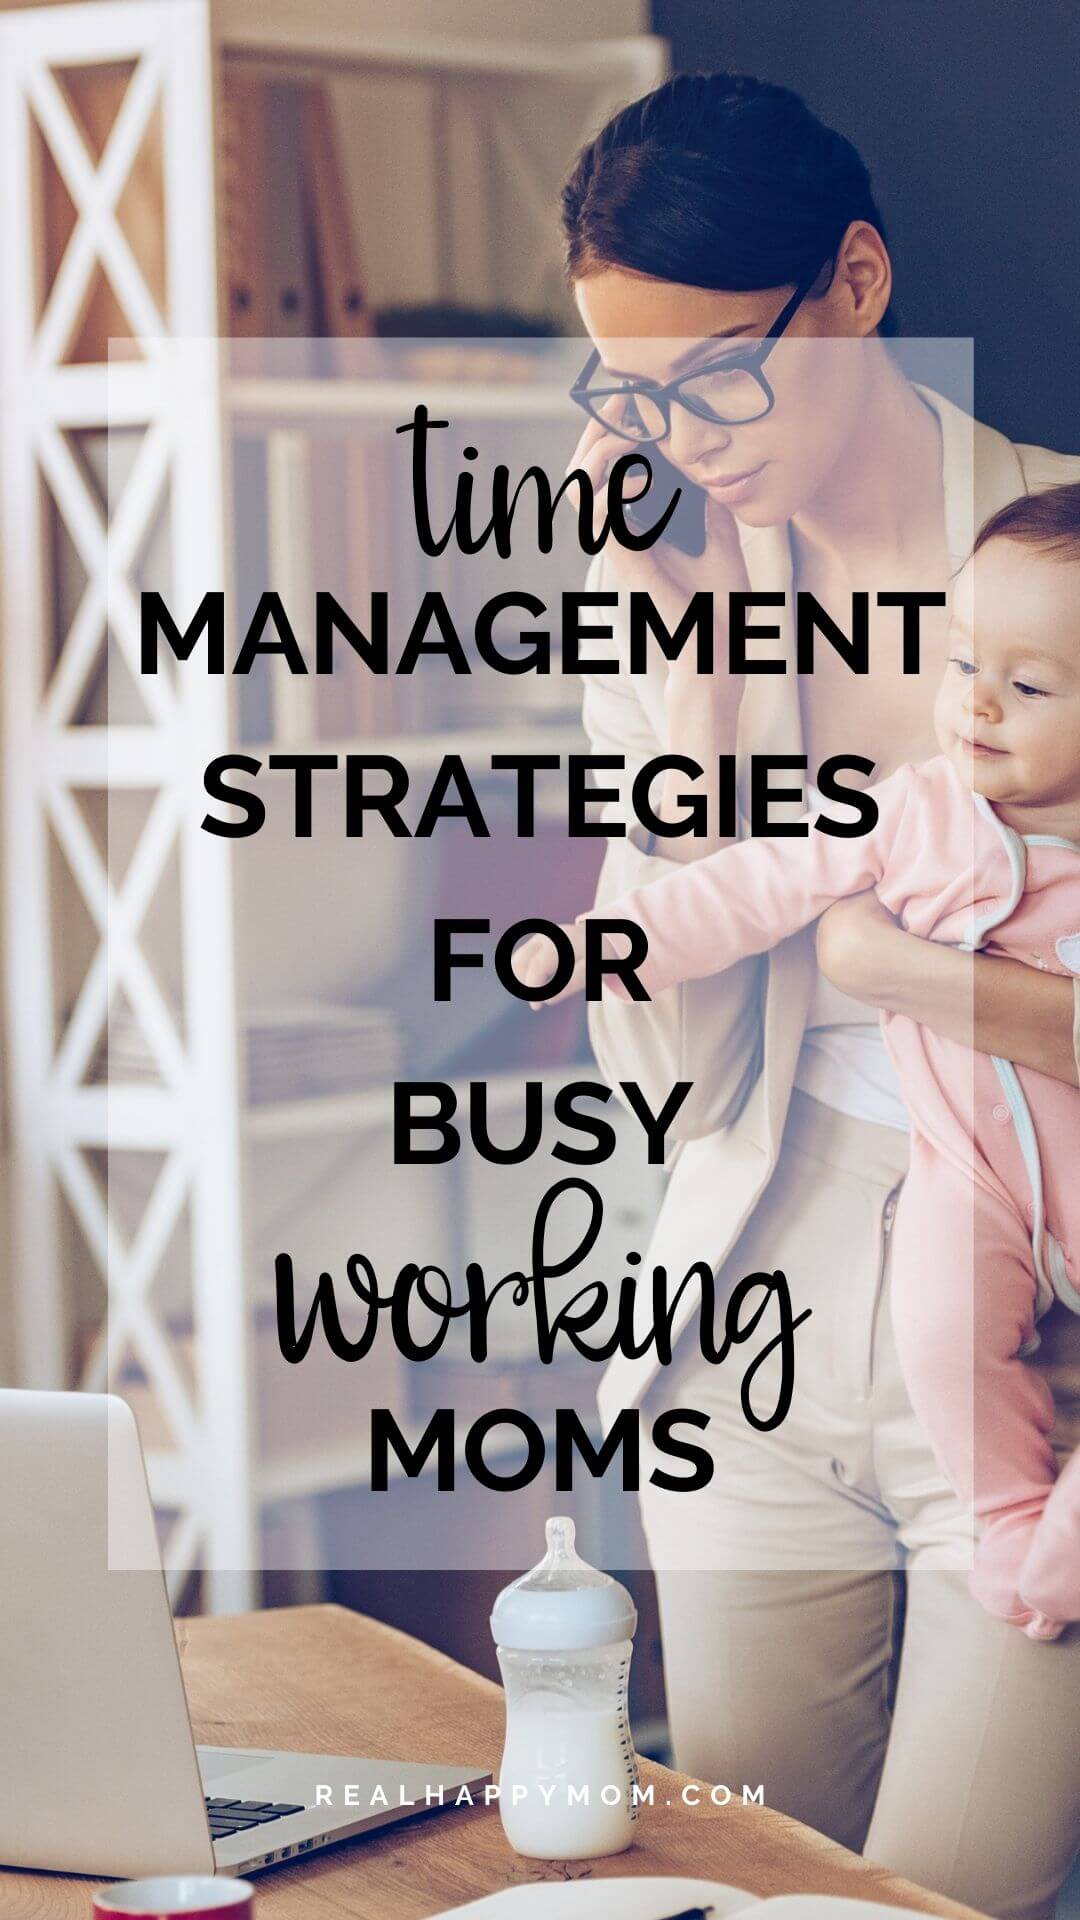 Time Management Strategies for Busy Working Moms. Time to Get it Together, Mama